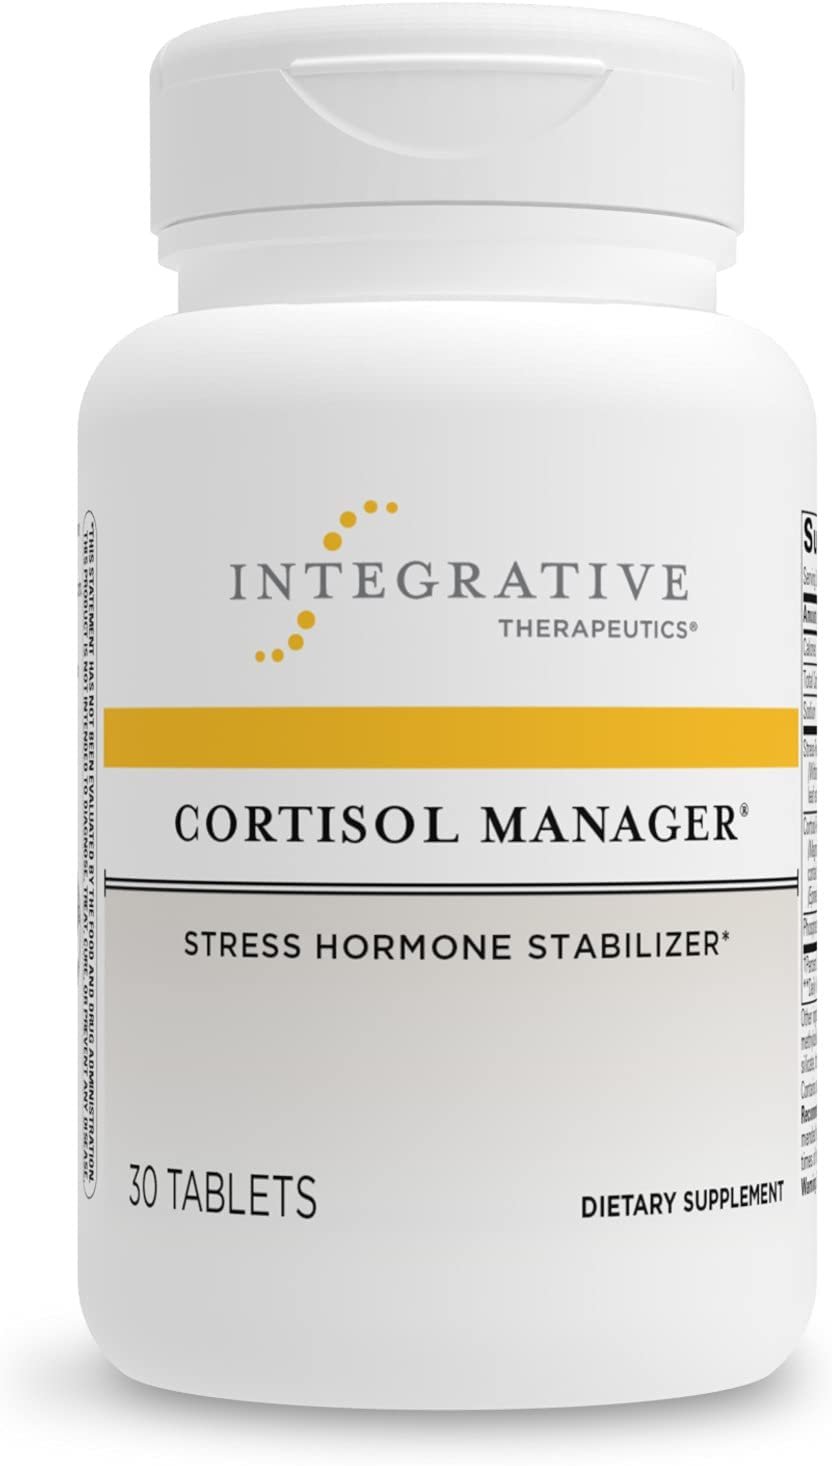 Inegrative Therapeutics Cortisol Manager pill bottle.